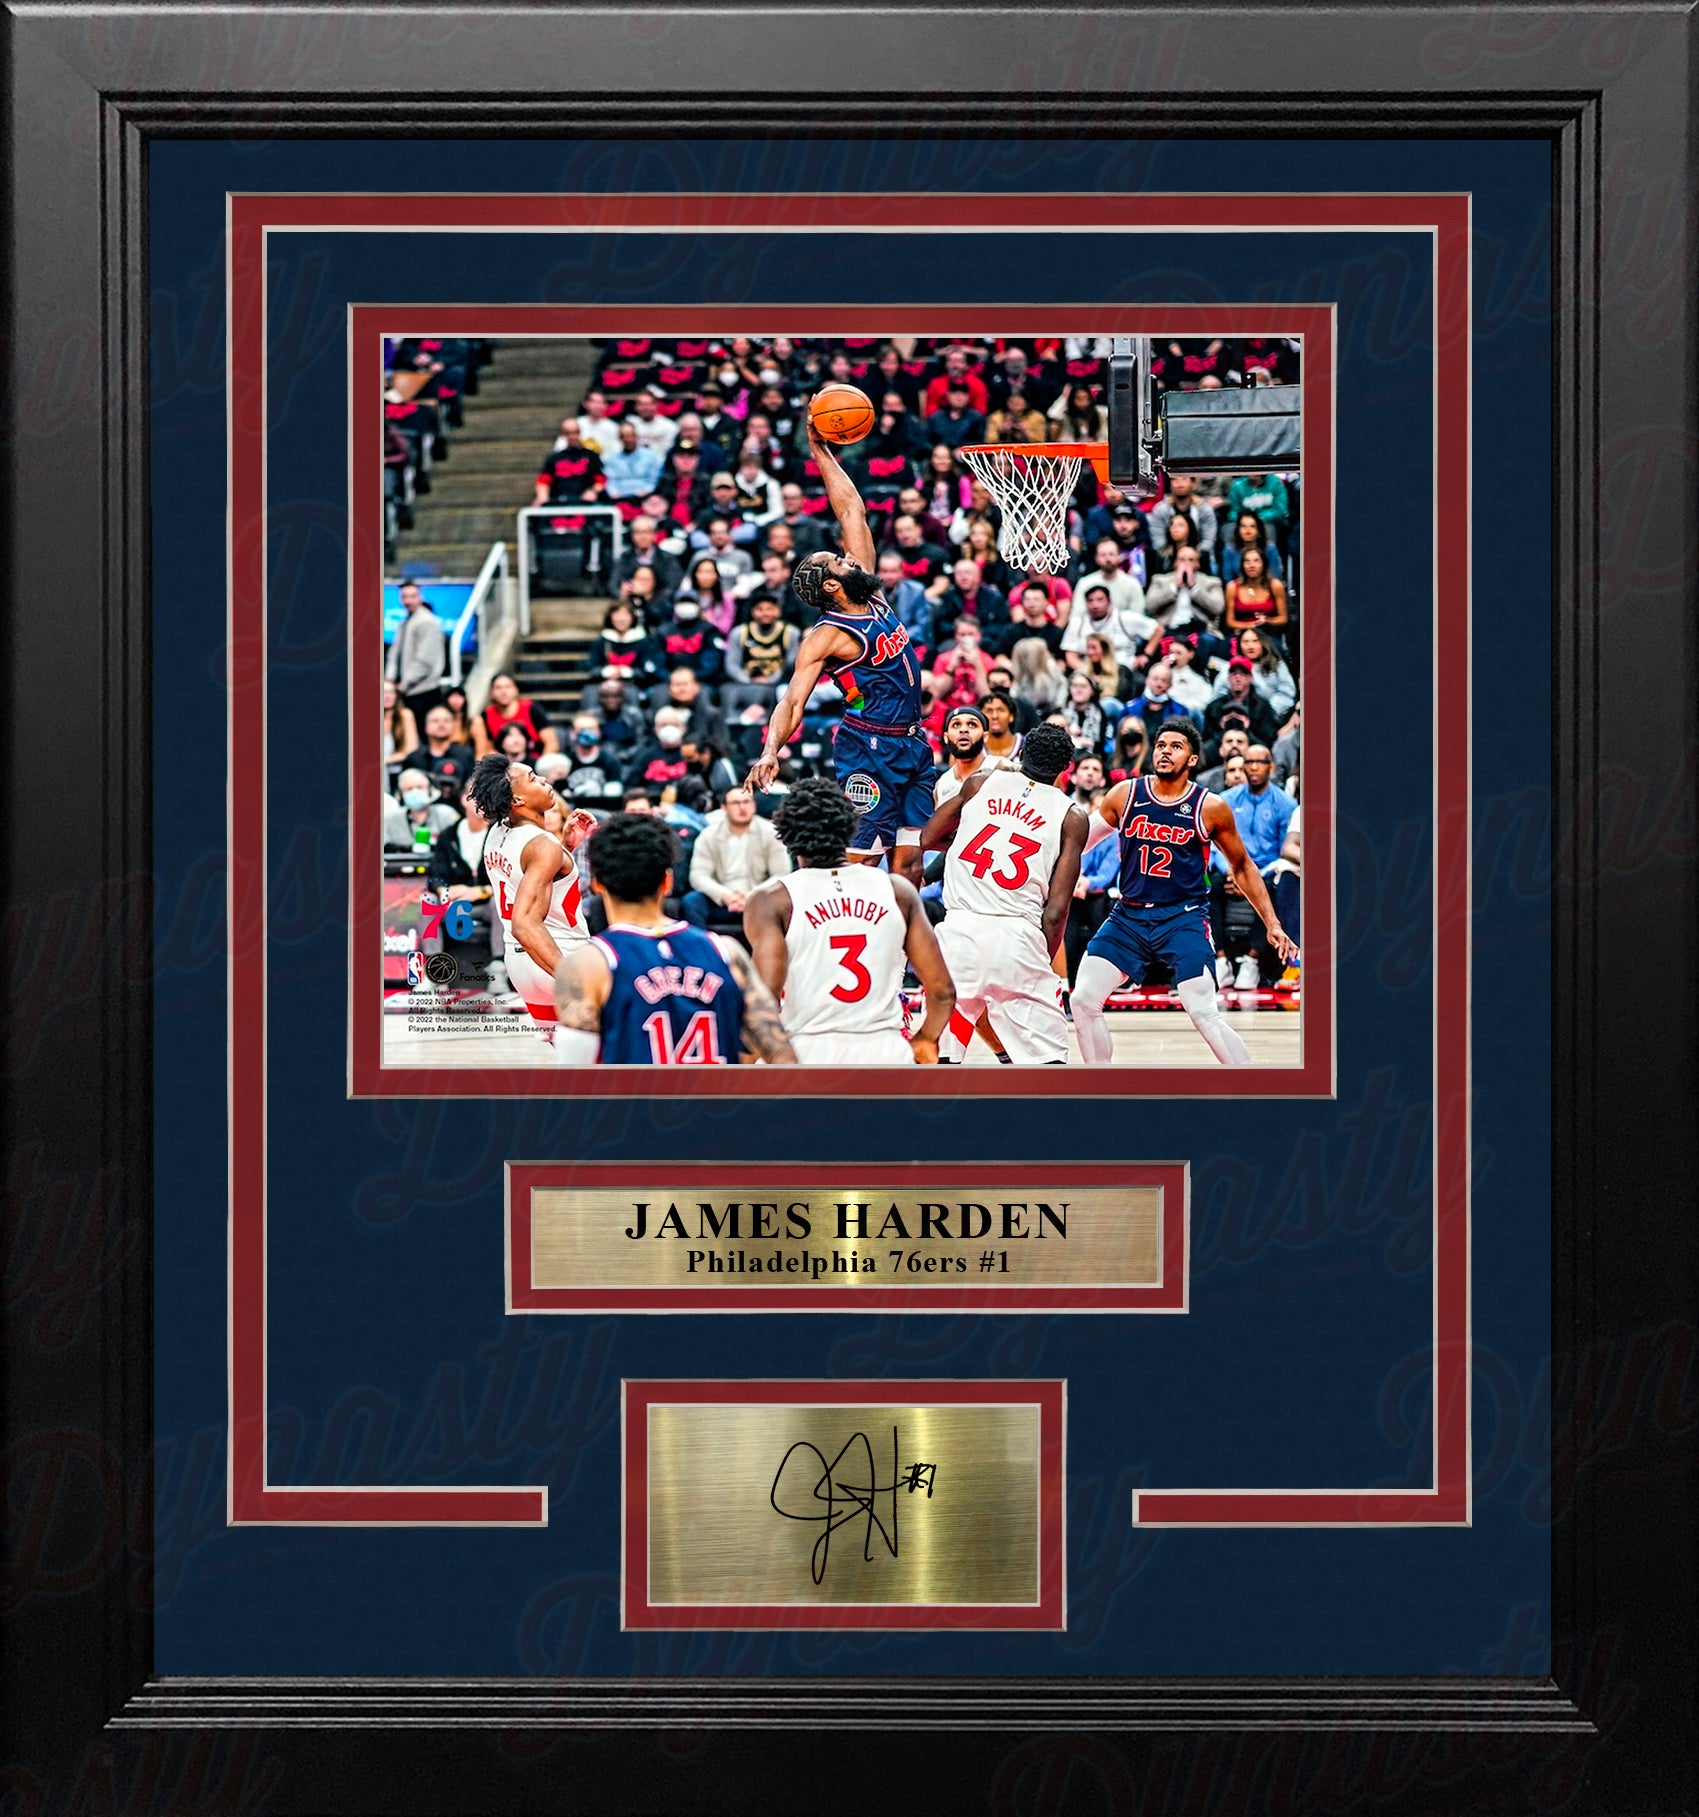 James Harden in Action Philadelphia 76ers 8" x 10" Framed Basketball Photo with Engraved Autograph - Dynasty Sports & Framing 